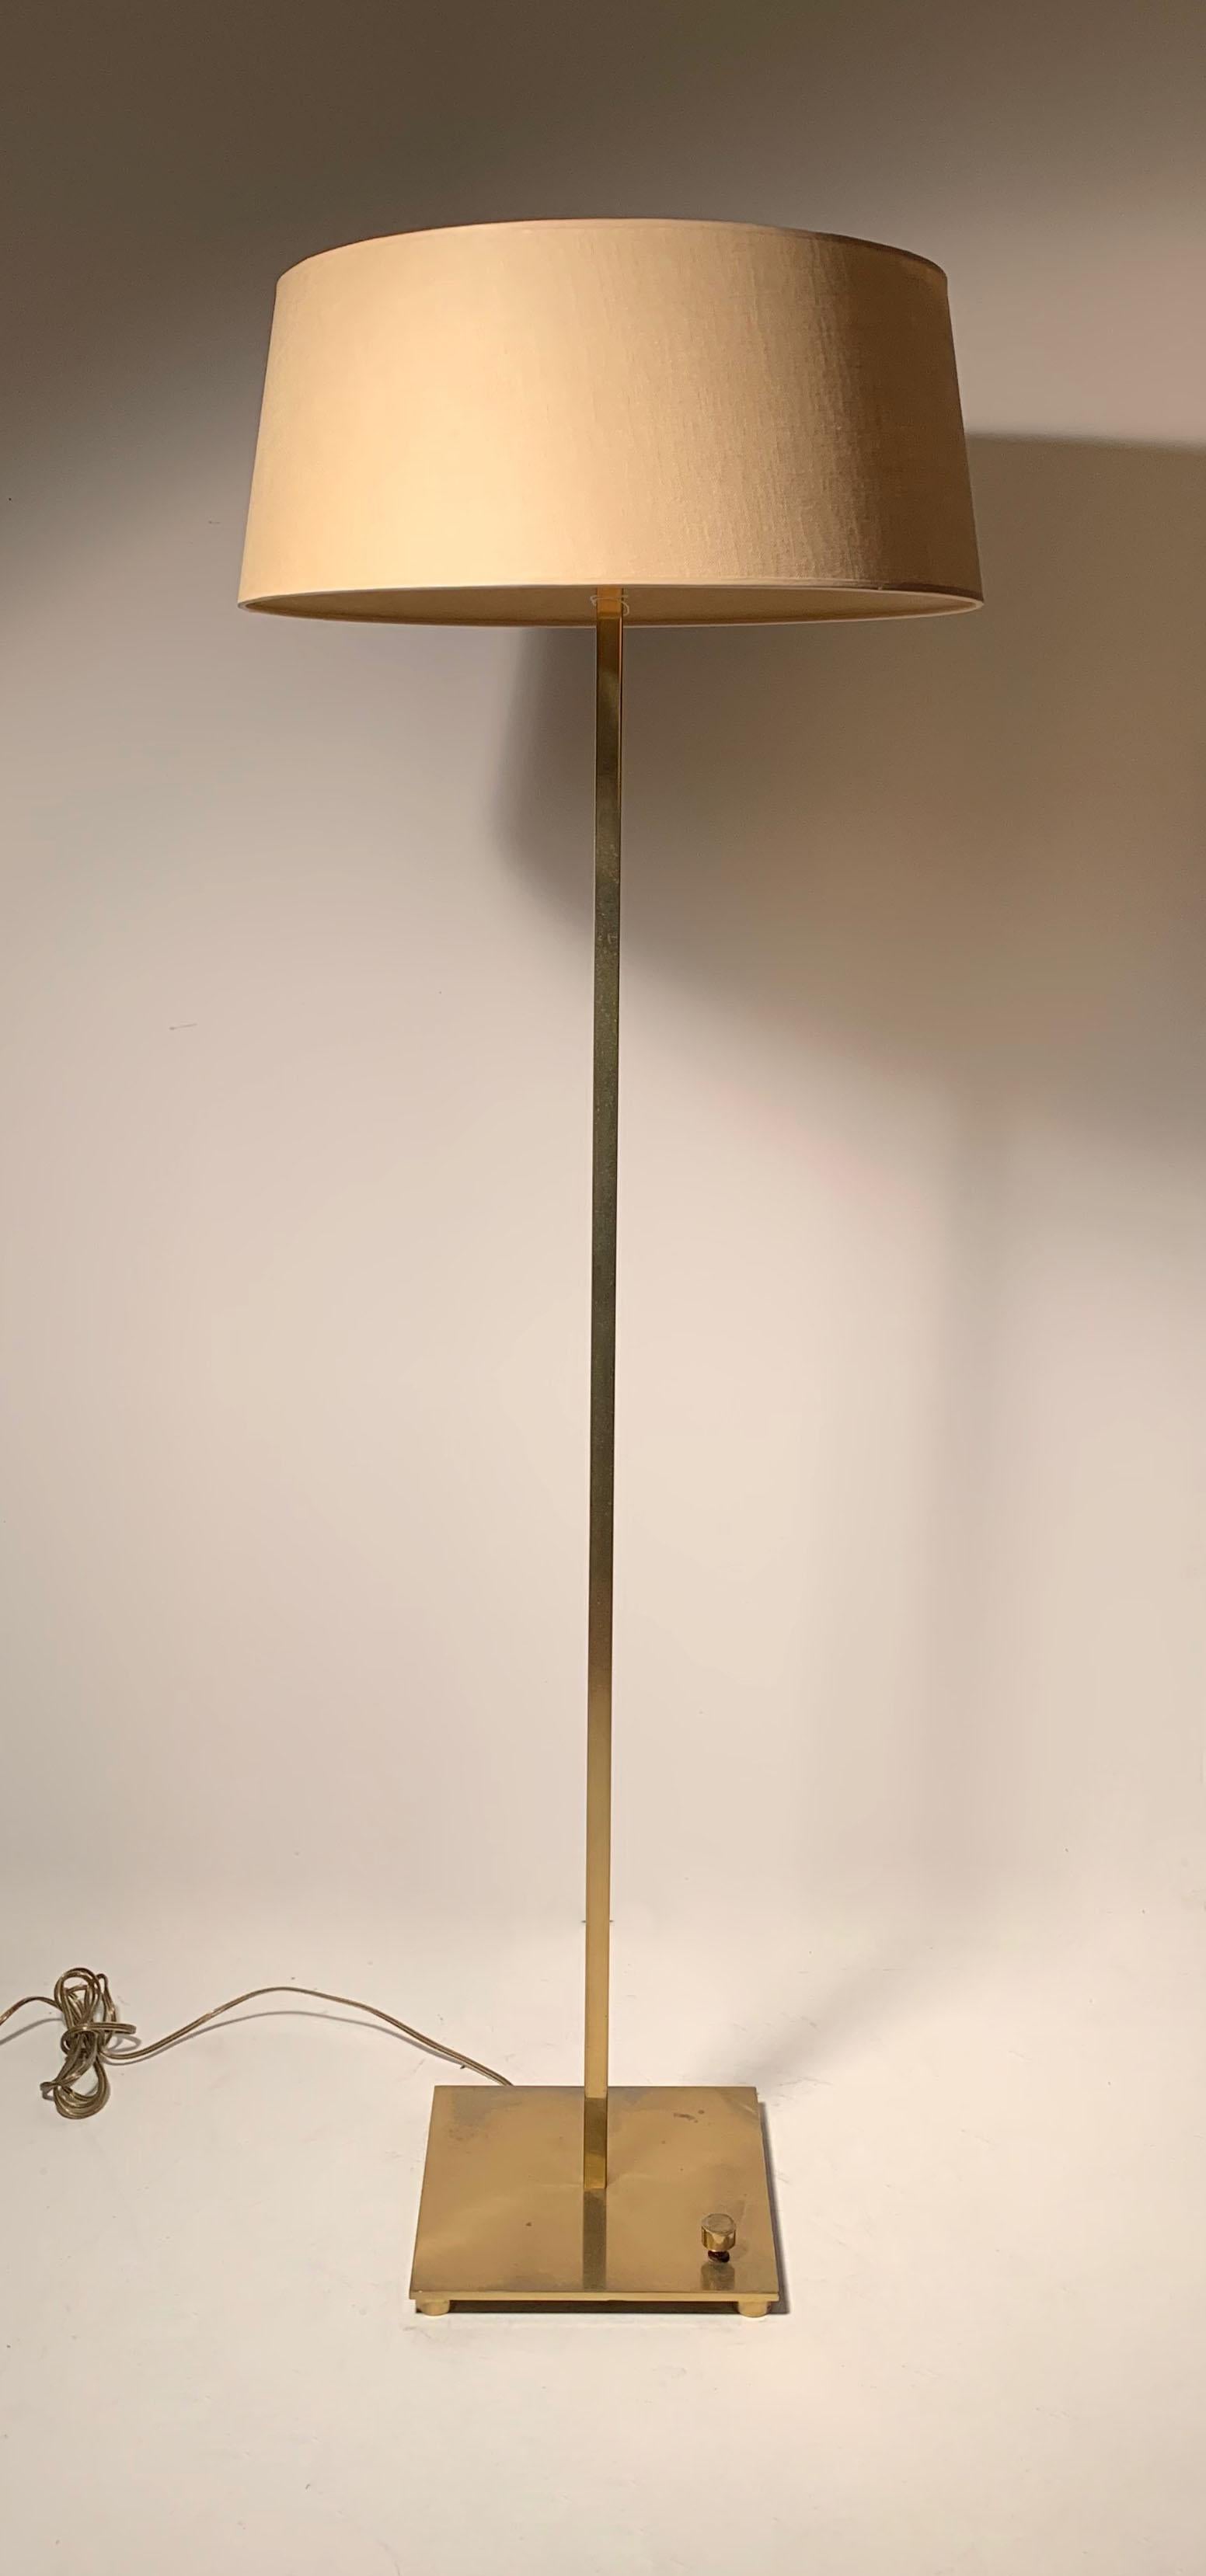 Floor lamp, model #212, with two-light sockets by Stewart Ross James for Hansen. Style of Paul Mccobb.

Base is 9